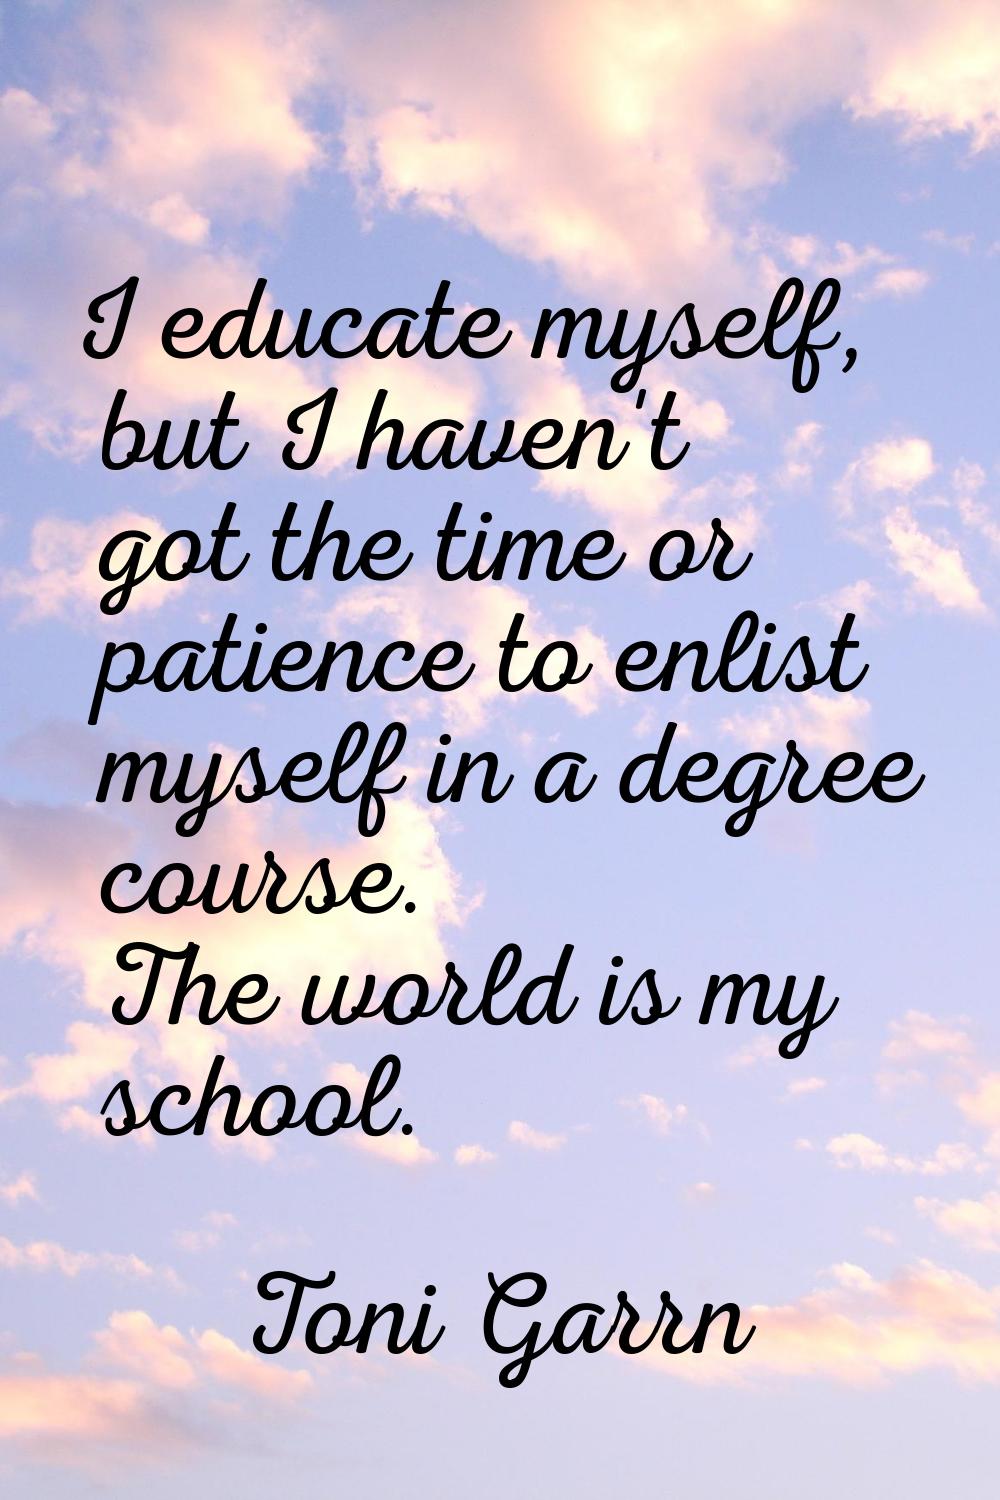 I educate myself, but I haven't got the time or patience to enlist myself in a degree course. The w